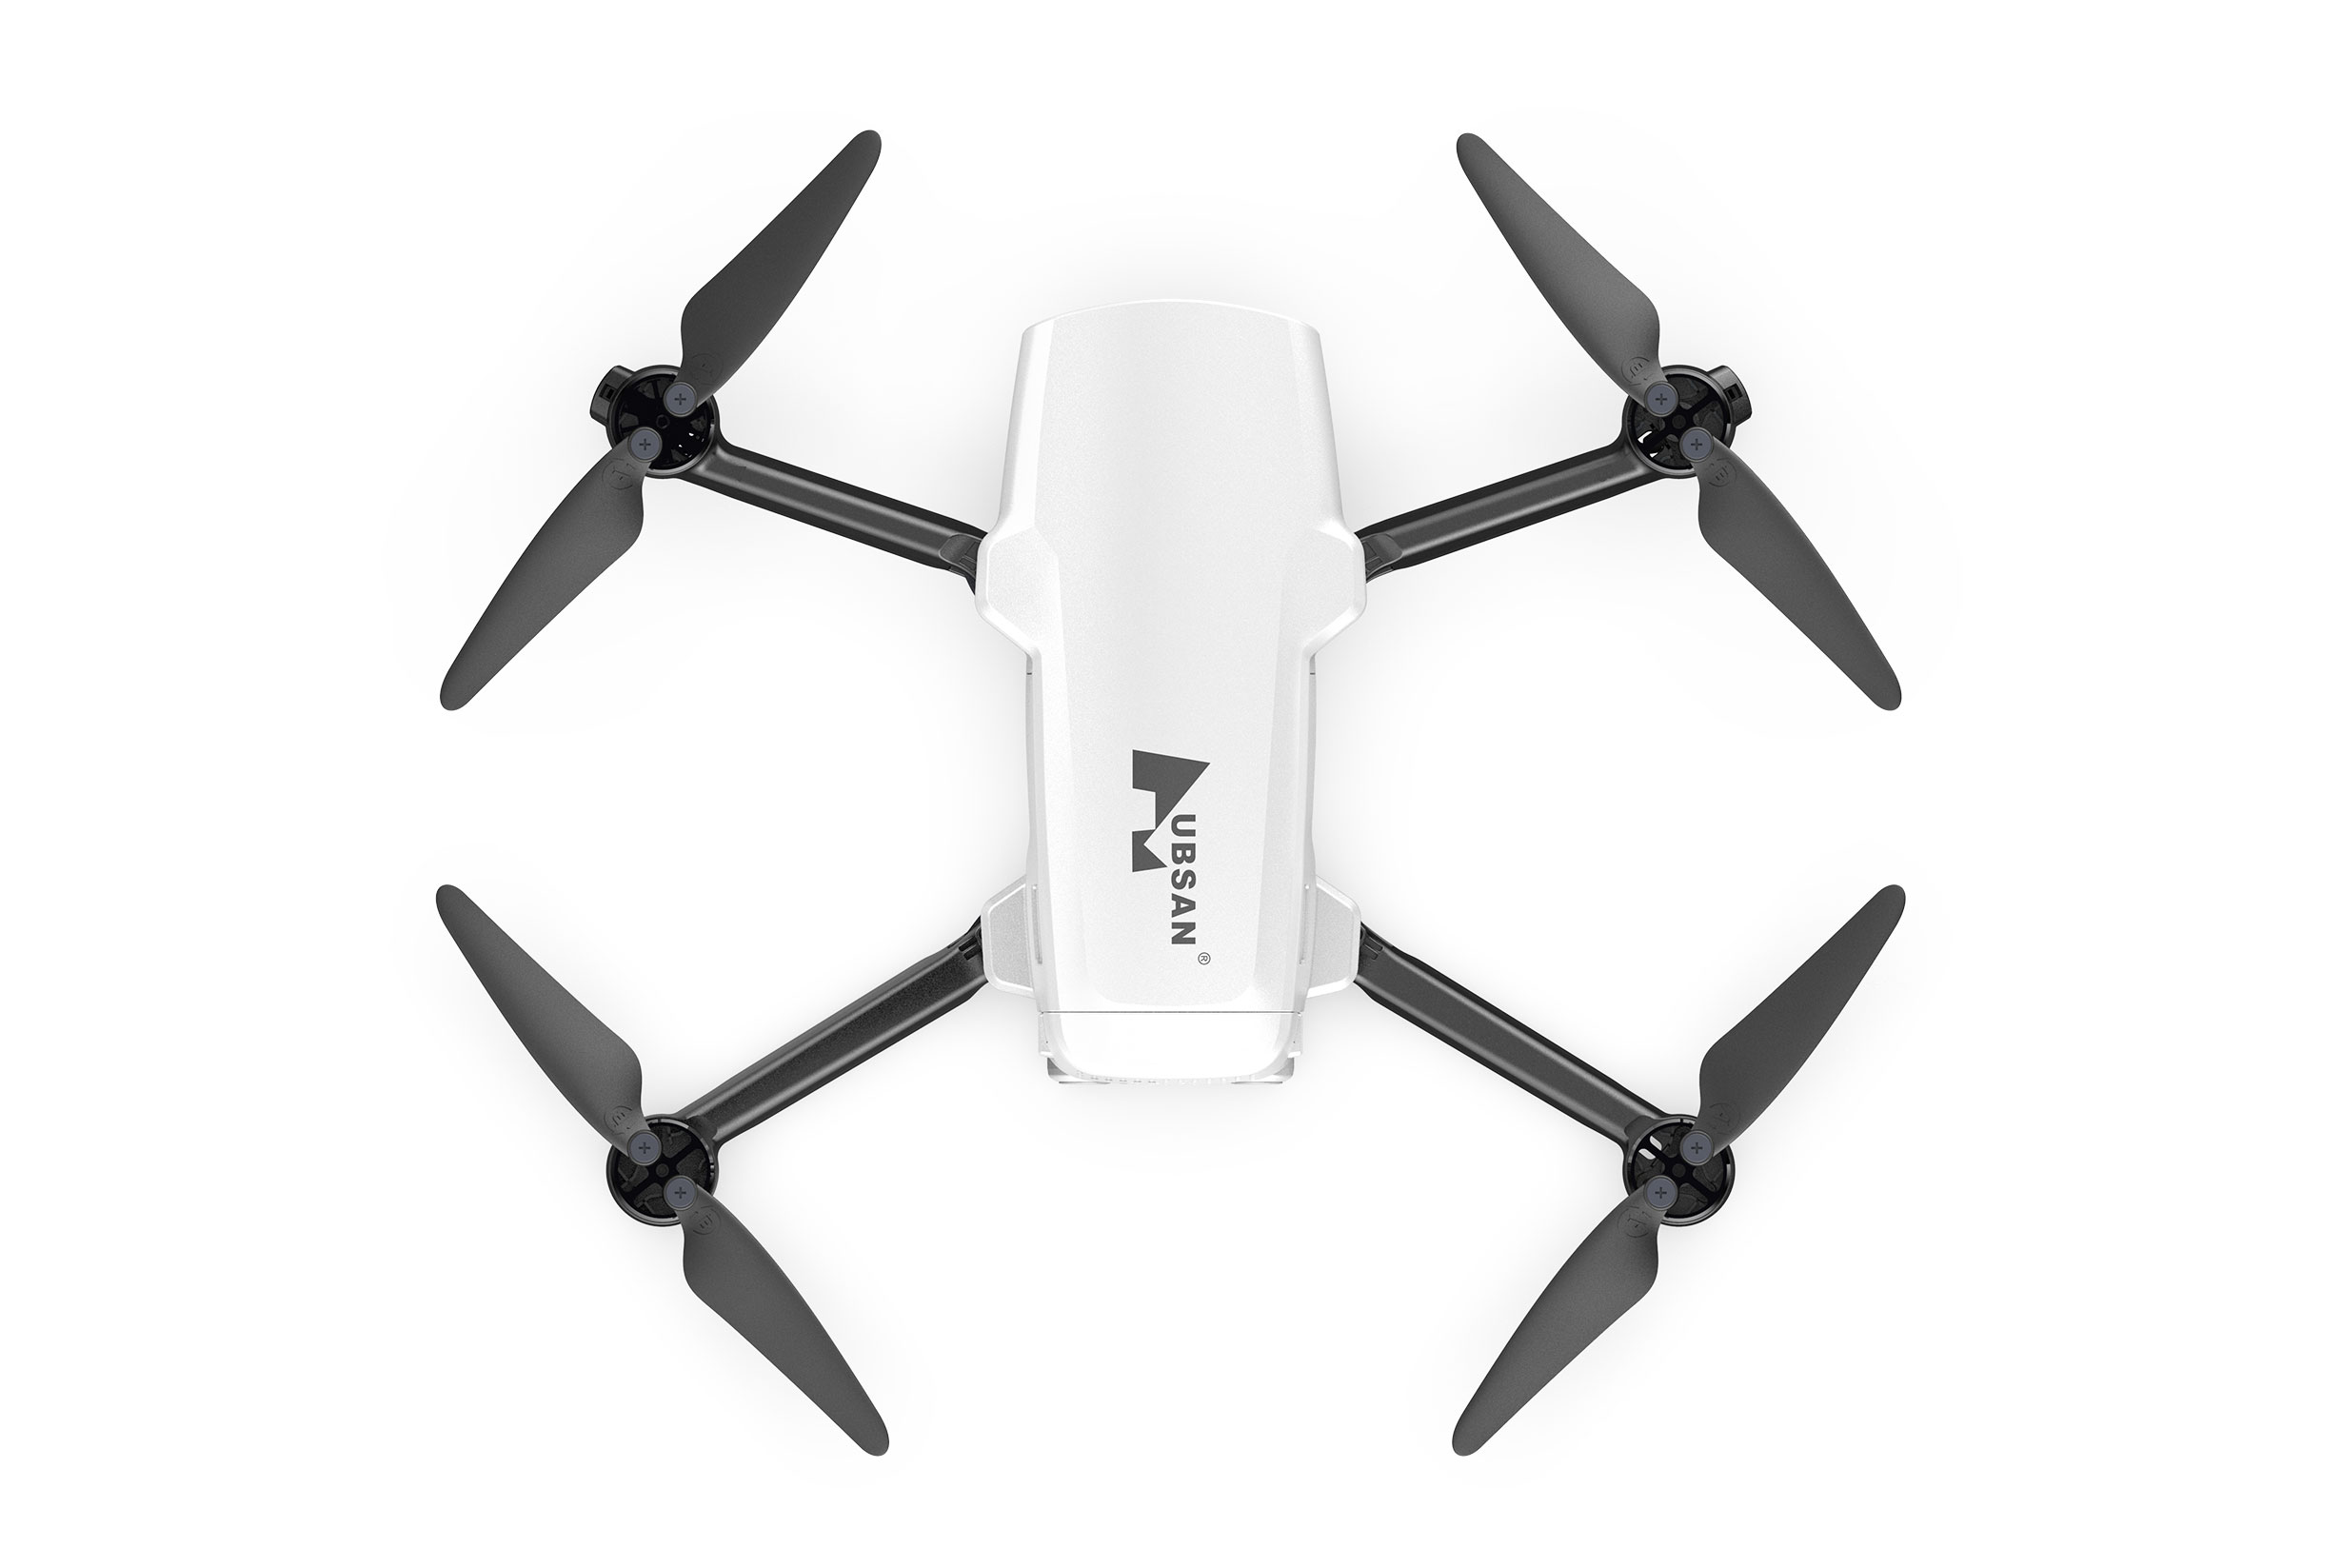 Hubsan Mini standard version with 1 battery